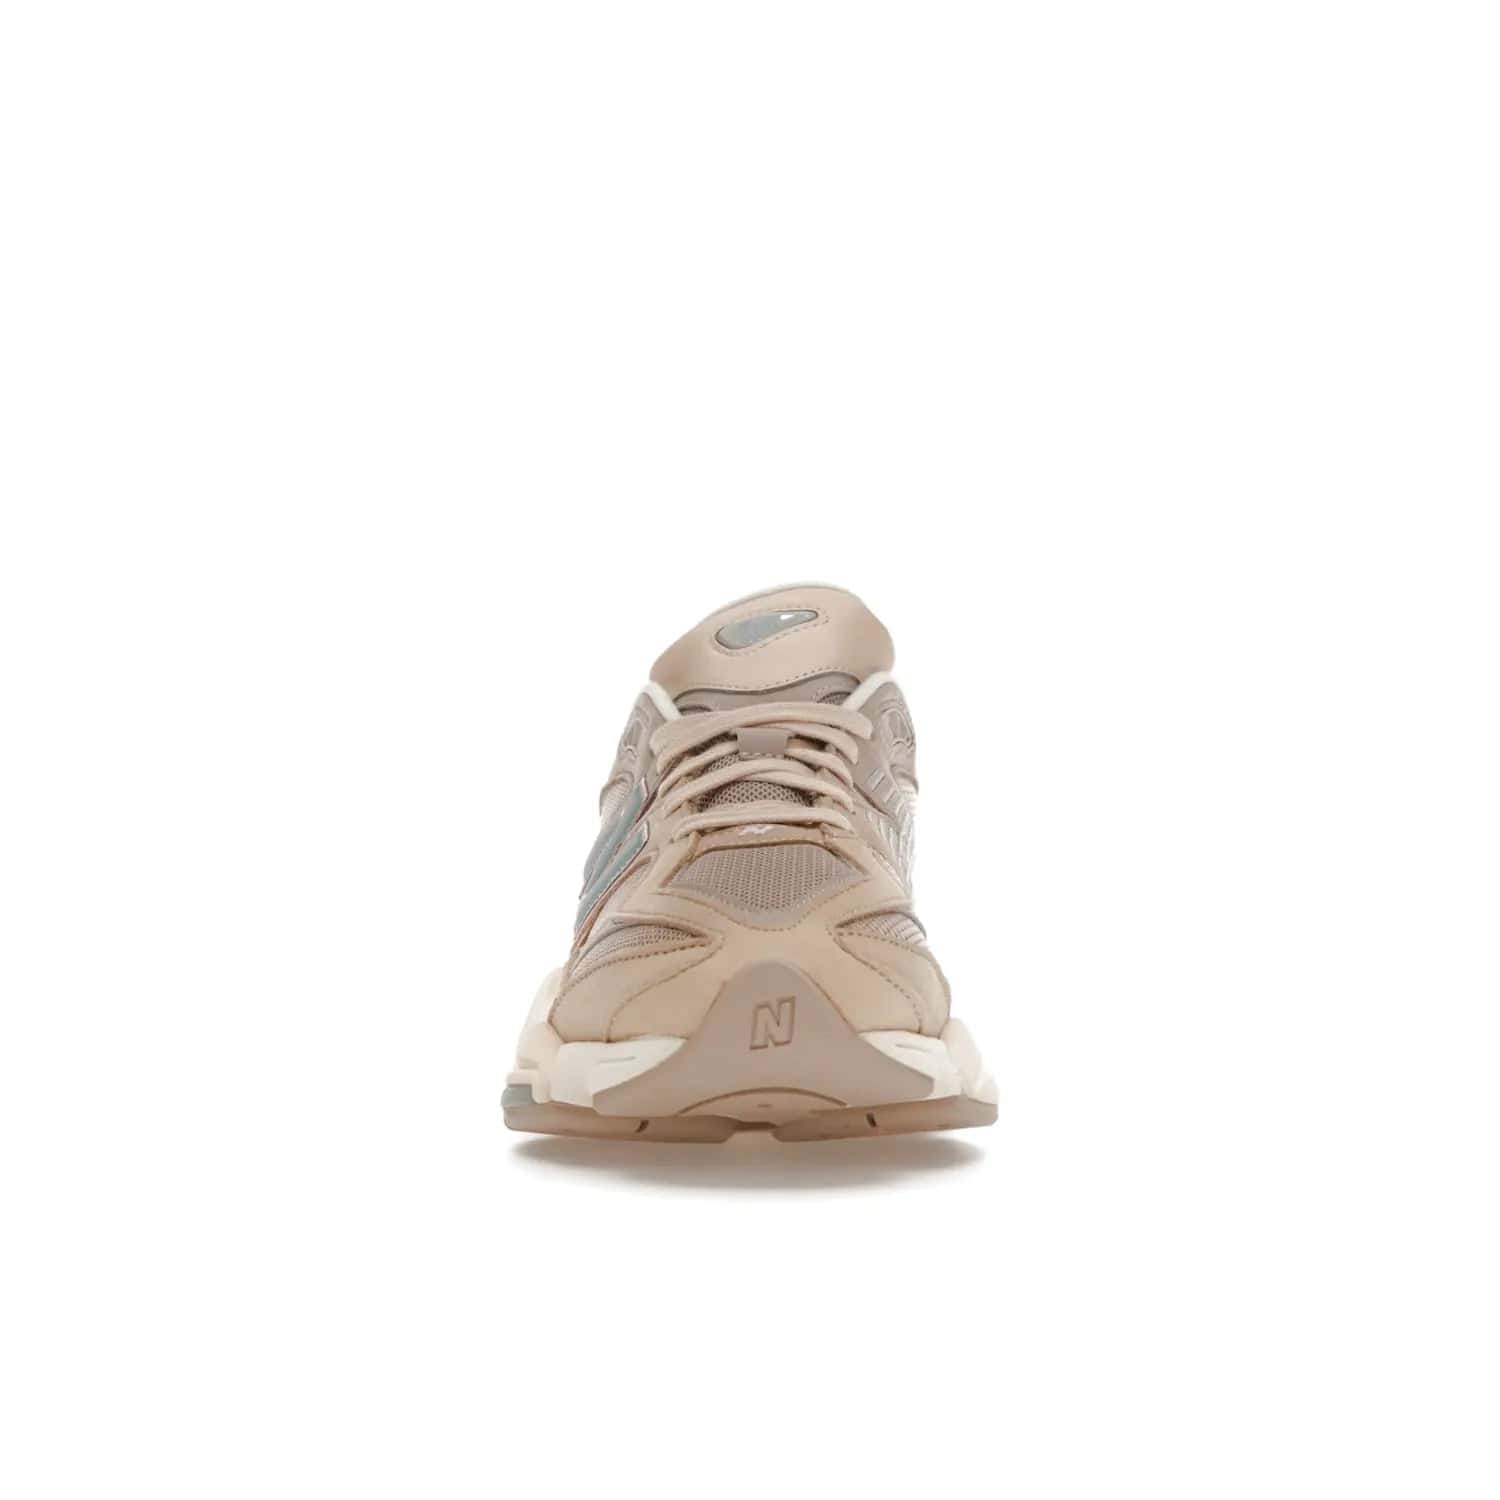 New Balance 9060 Ivory Cream Pink Sand - Image 10 - Only at www.BallersClubKickz.com - New Balance 9060 Ivory Cream Pink Sand - Sleek meshed upper, premium suede overlays, ABZORB cushioning. Get this unique sneaker ahead of the trend, launching December 6th, 2022!